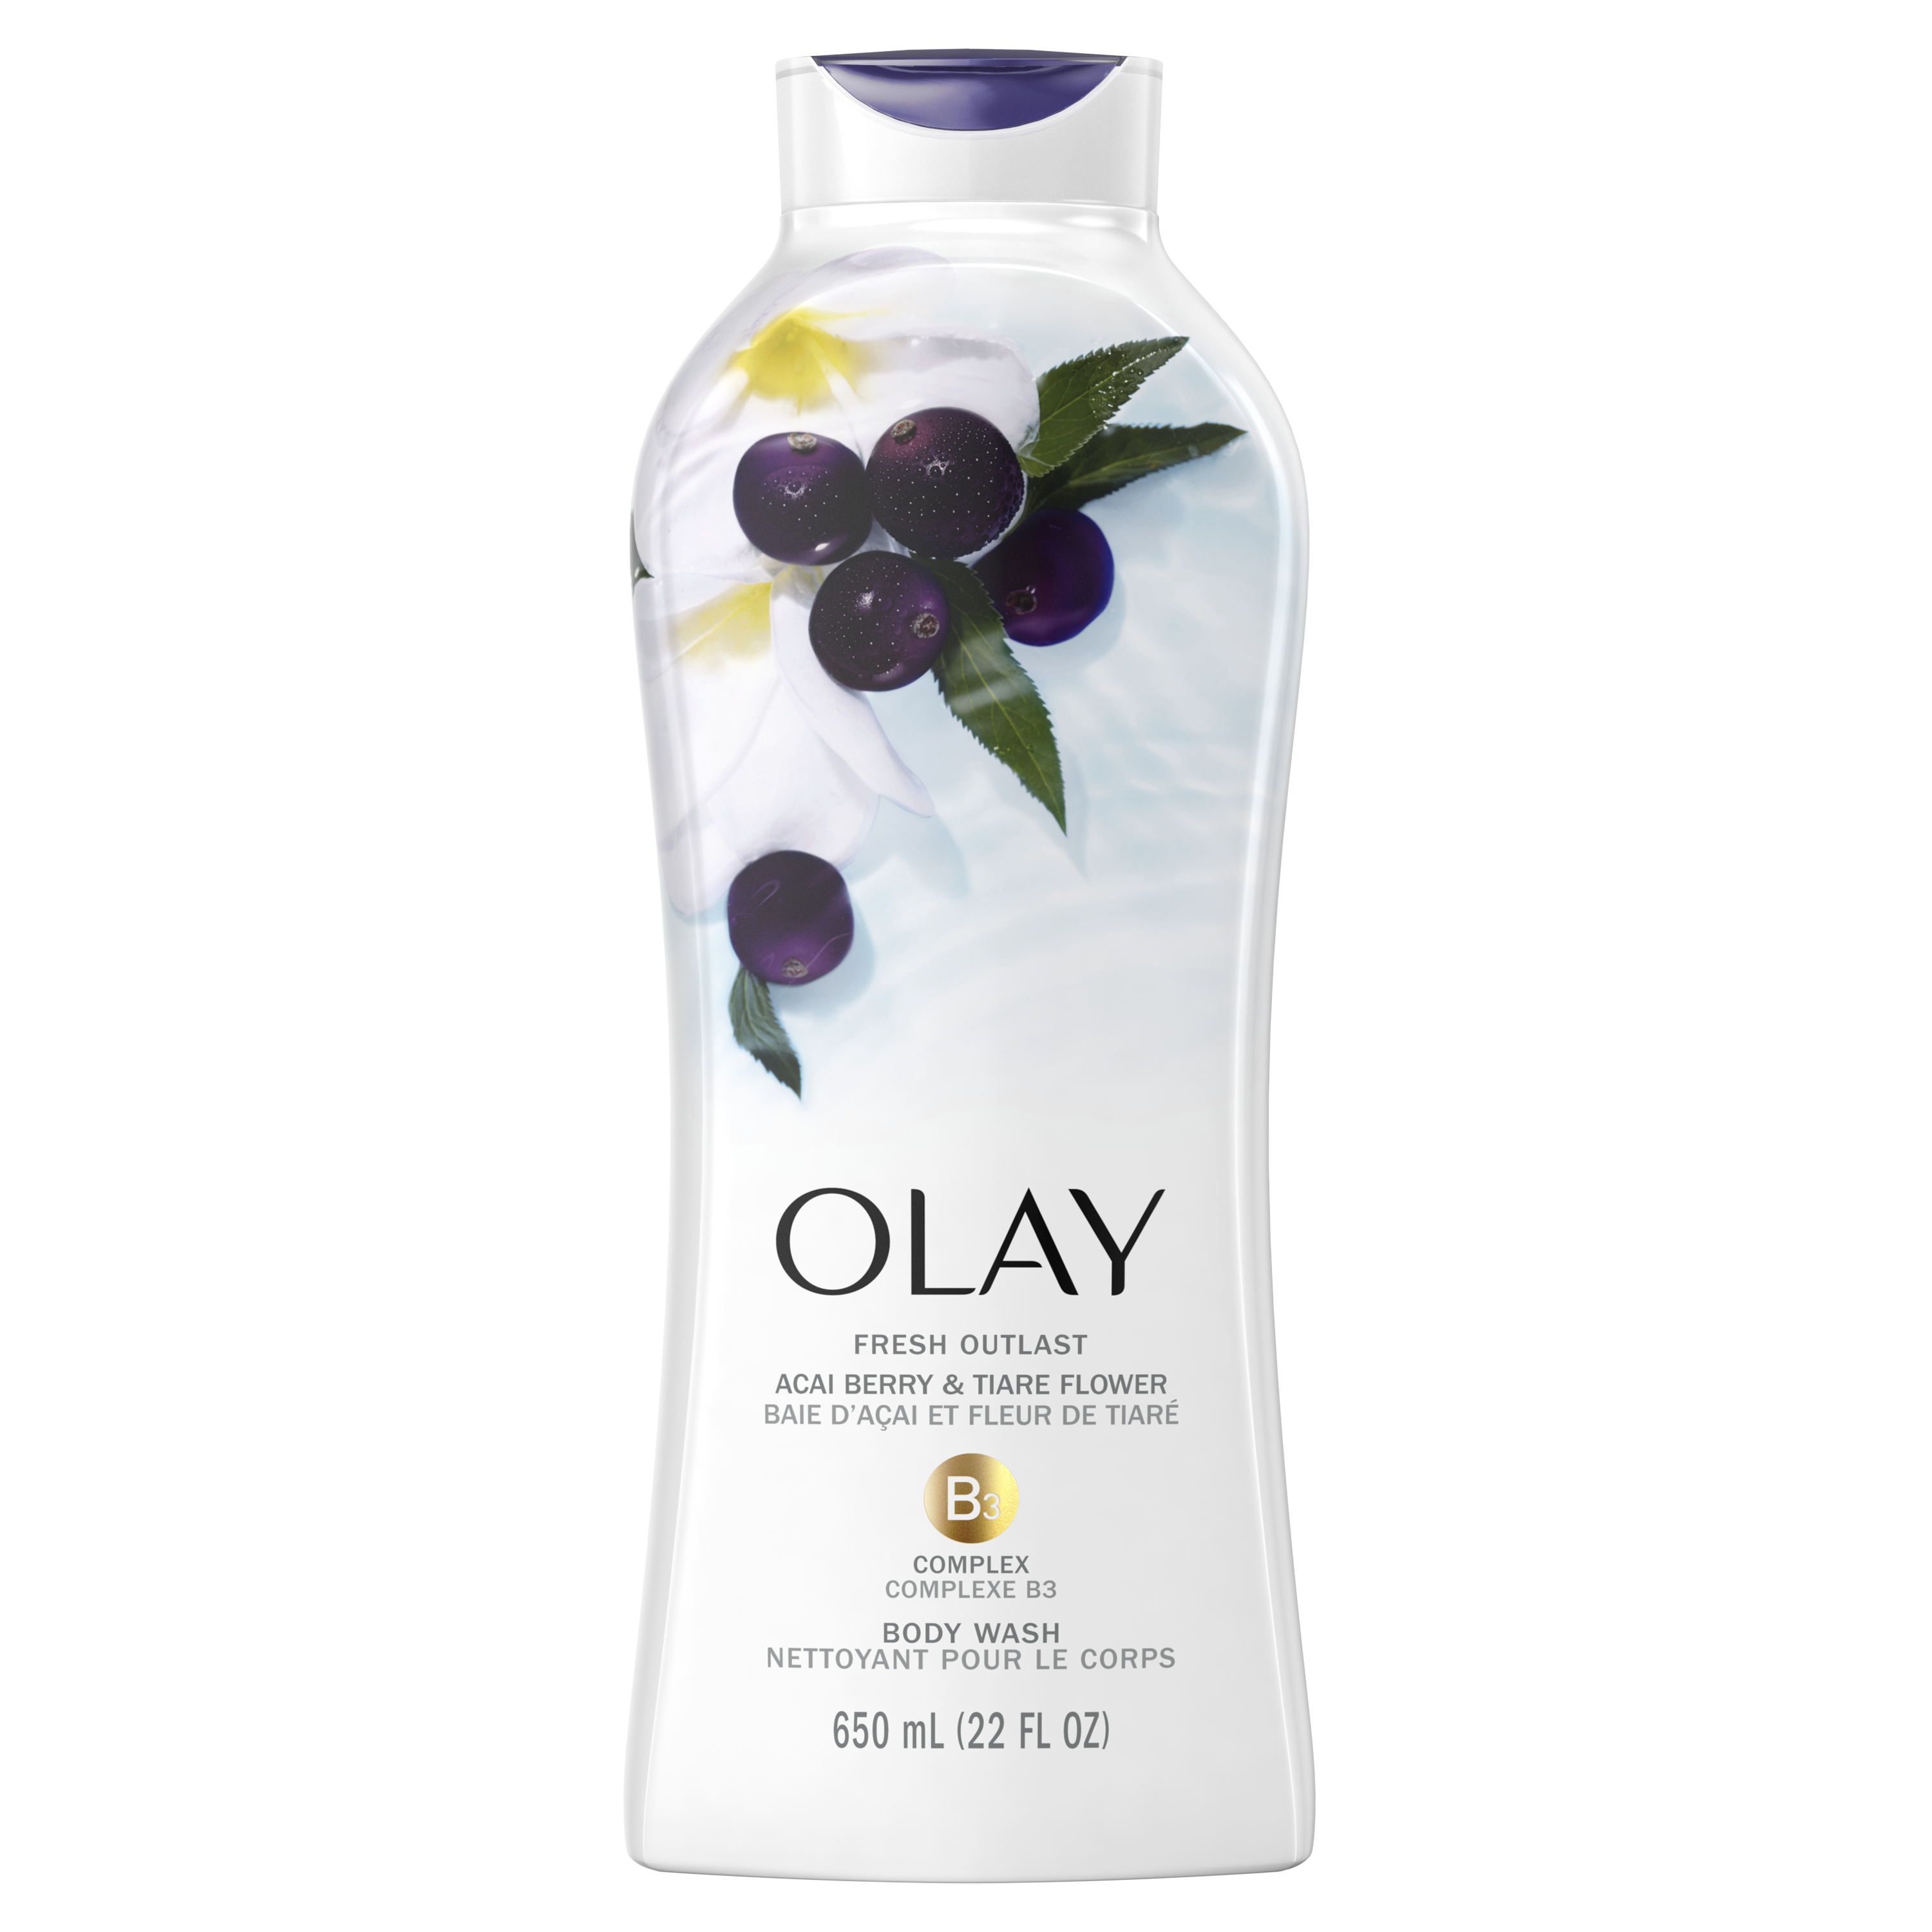 Fresh Outlast Acai Berry and Tiare Flower Body Wash -1